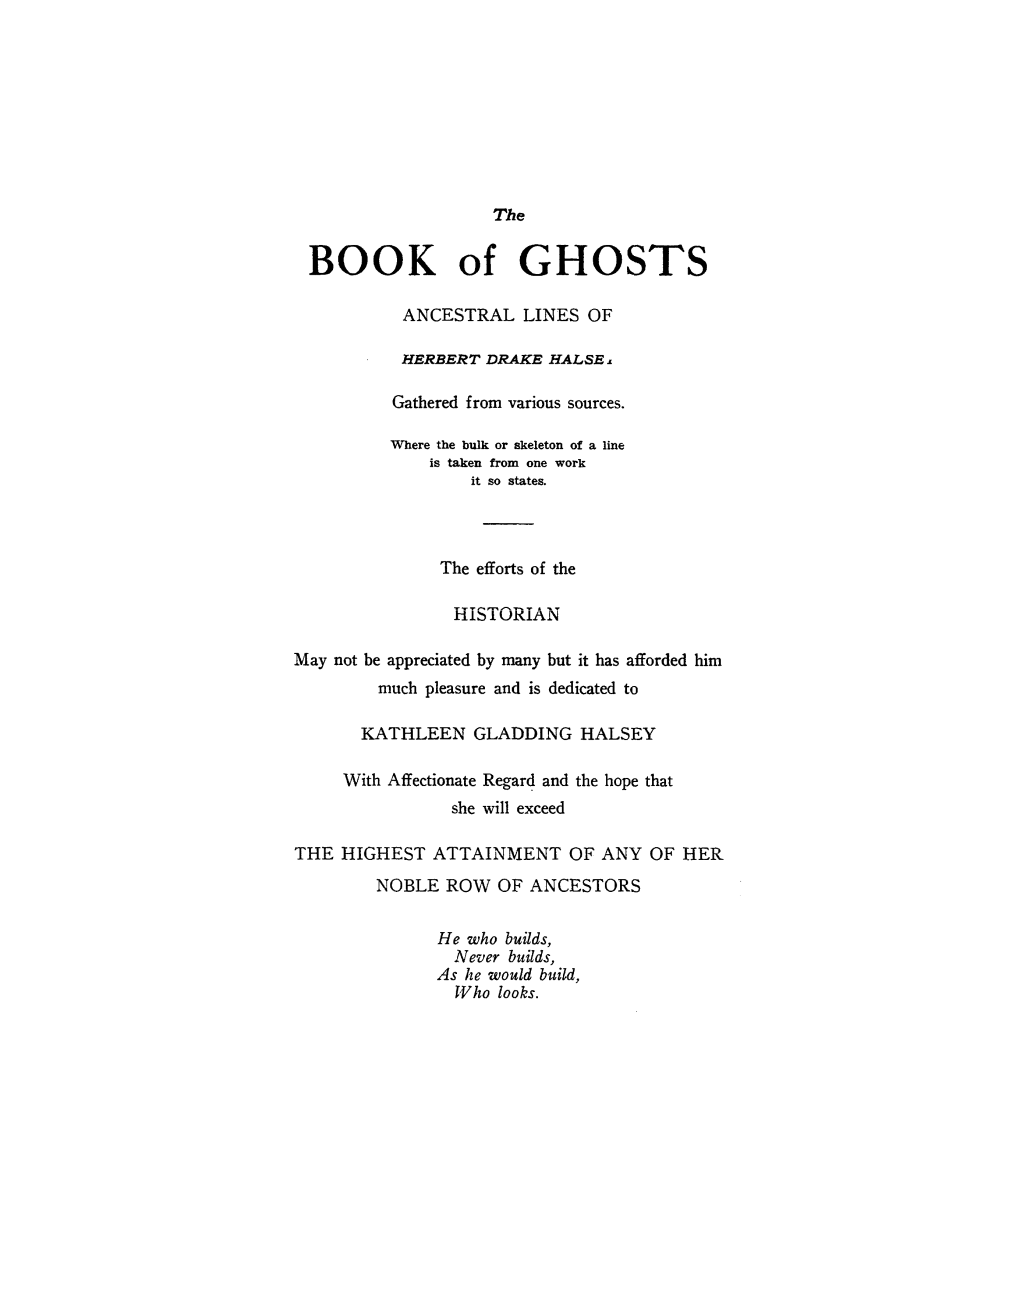 BOOK of GHOSTS